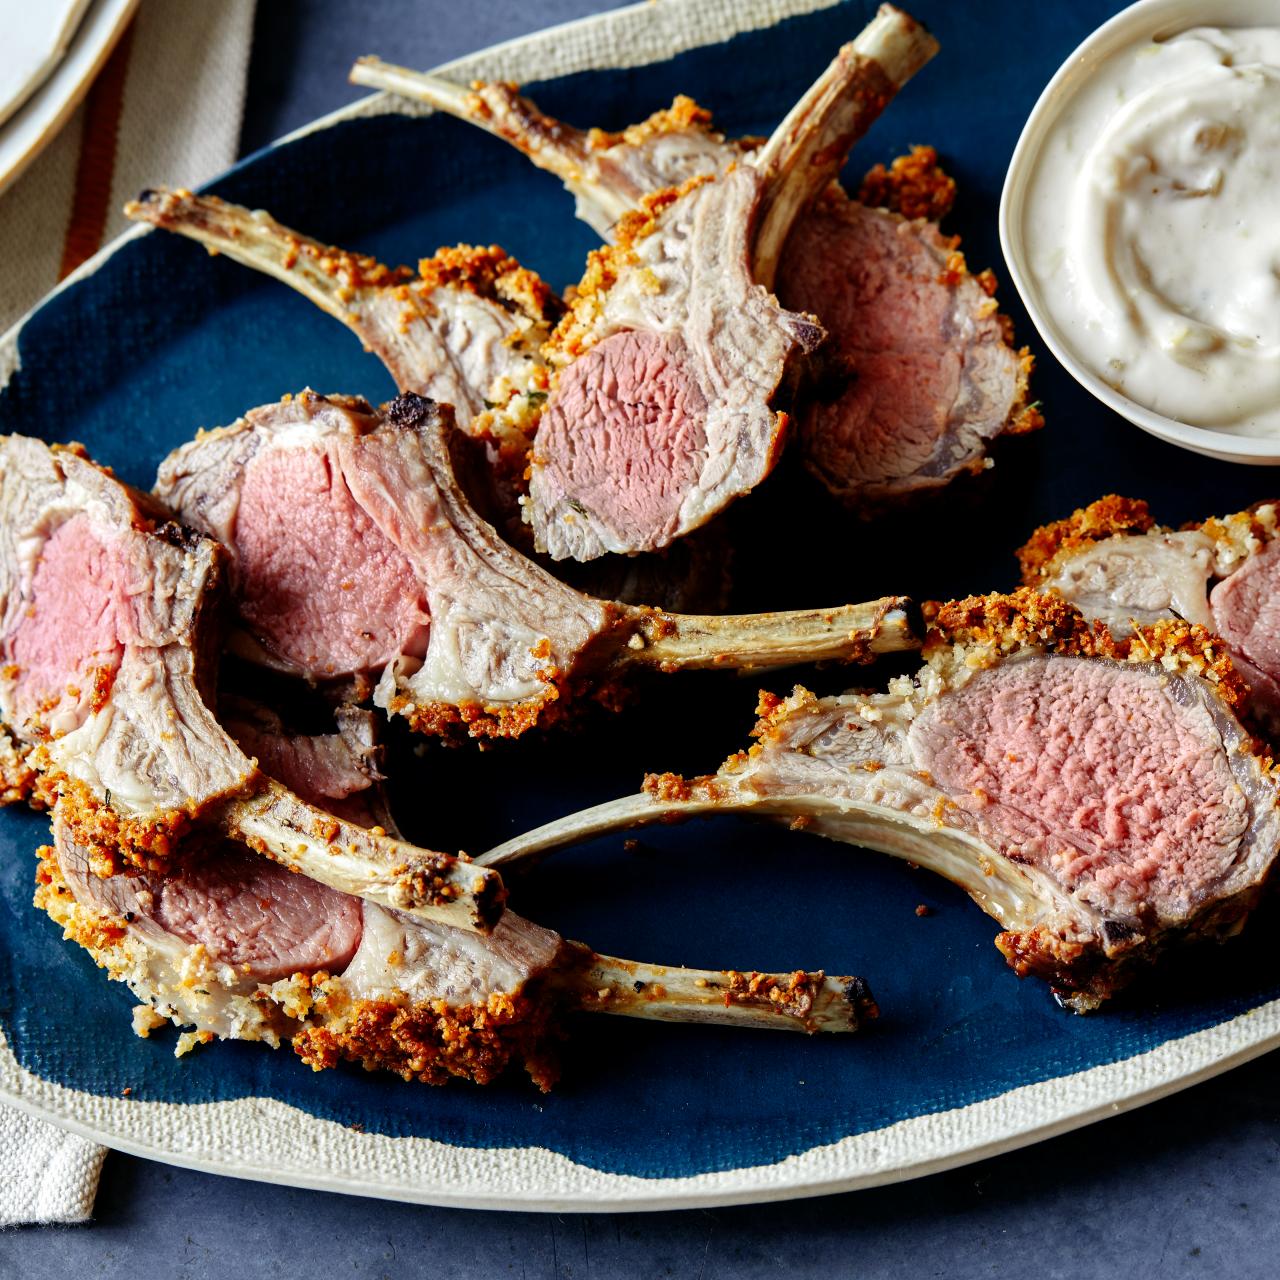 The Best Air Fryer Rack of Lamb You Will Ever Have - Daily Yum